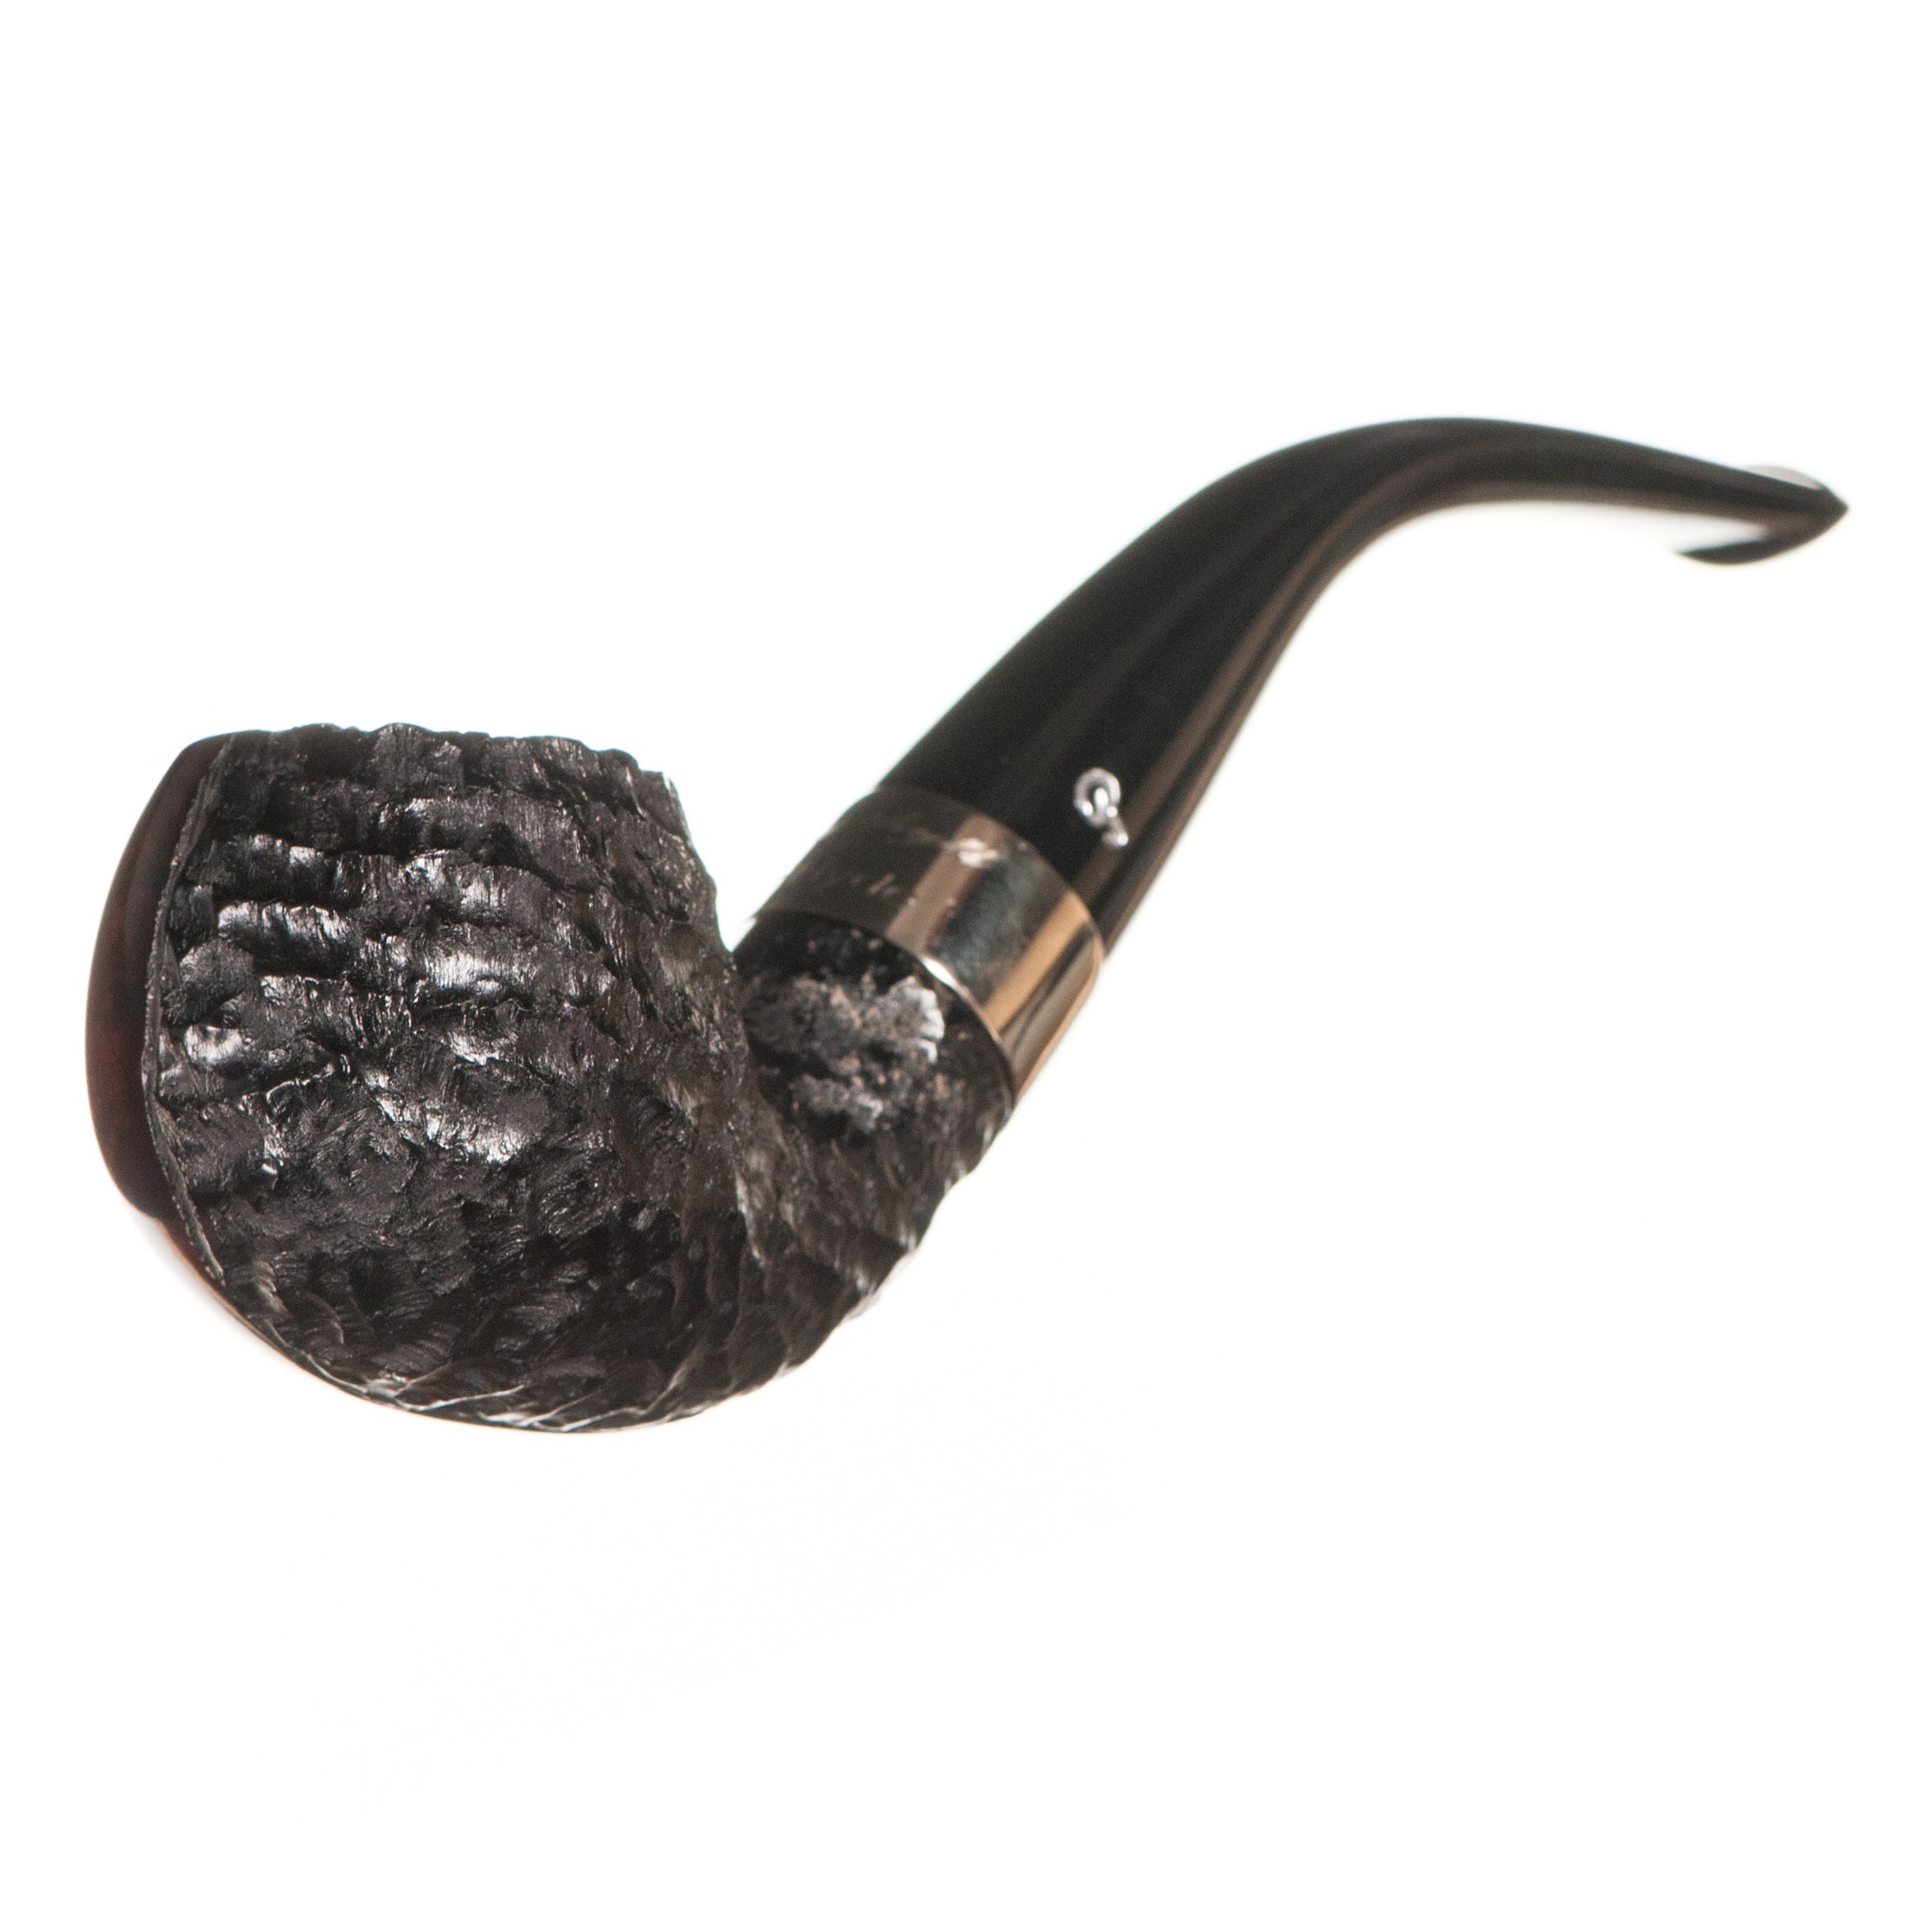 Peterson Jekyll & Hyde 03 Smooth/Rustic Pipe